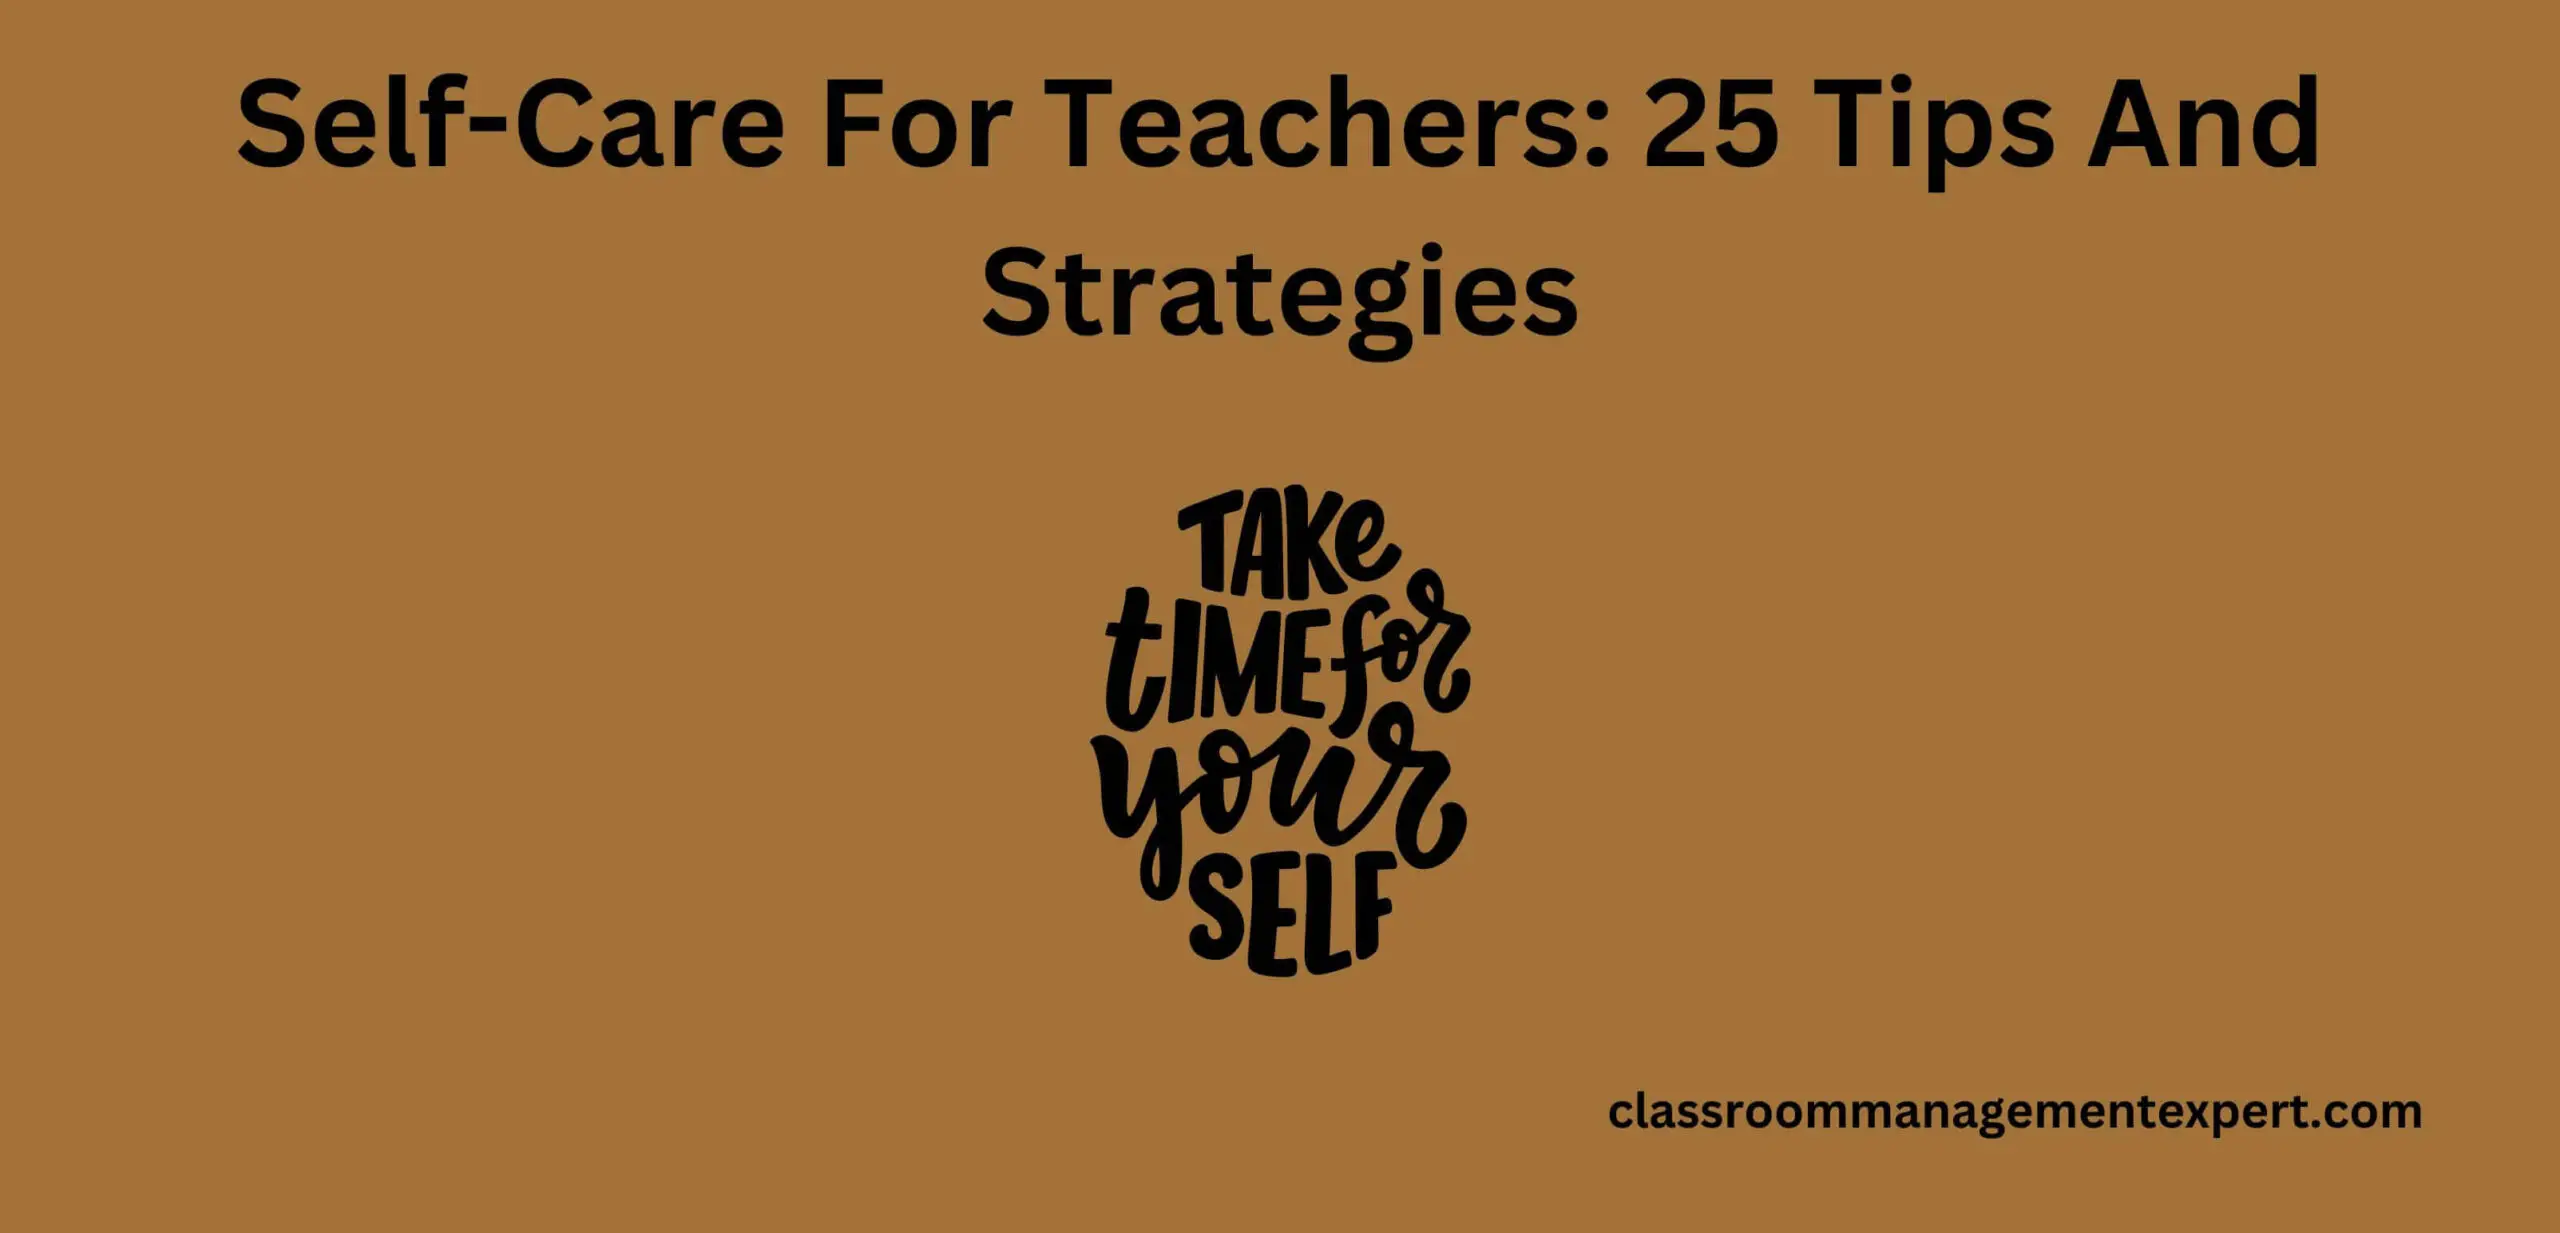 Self-Care For Teachers: 25 Tips And Strategies